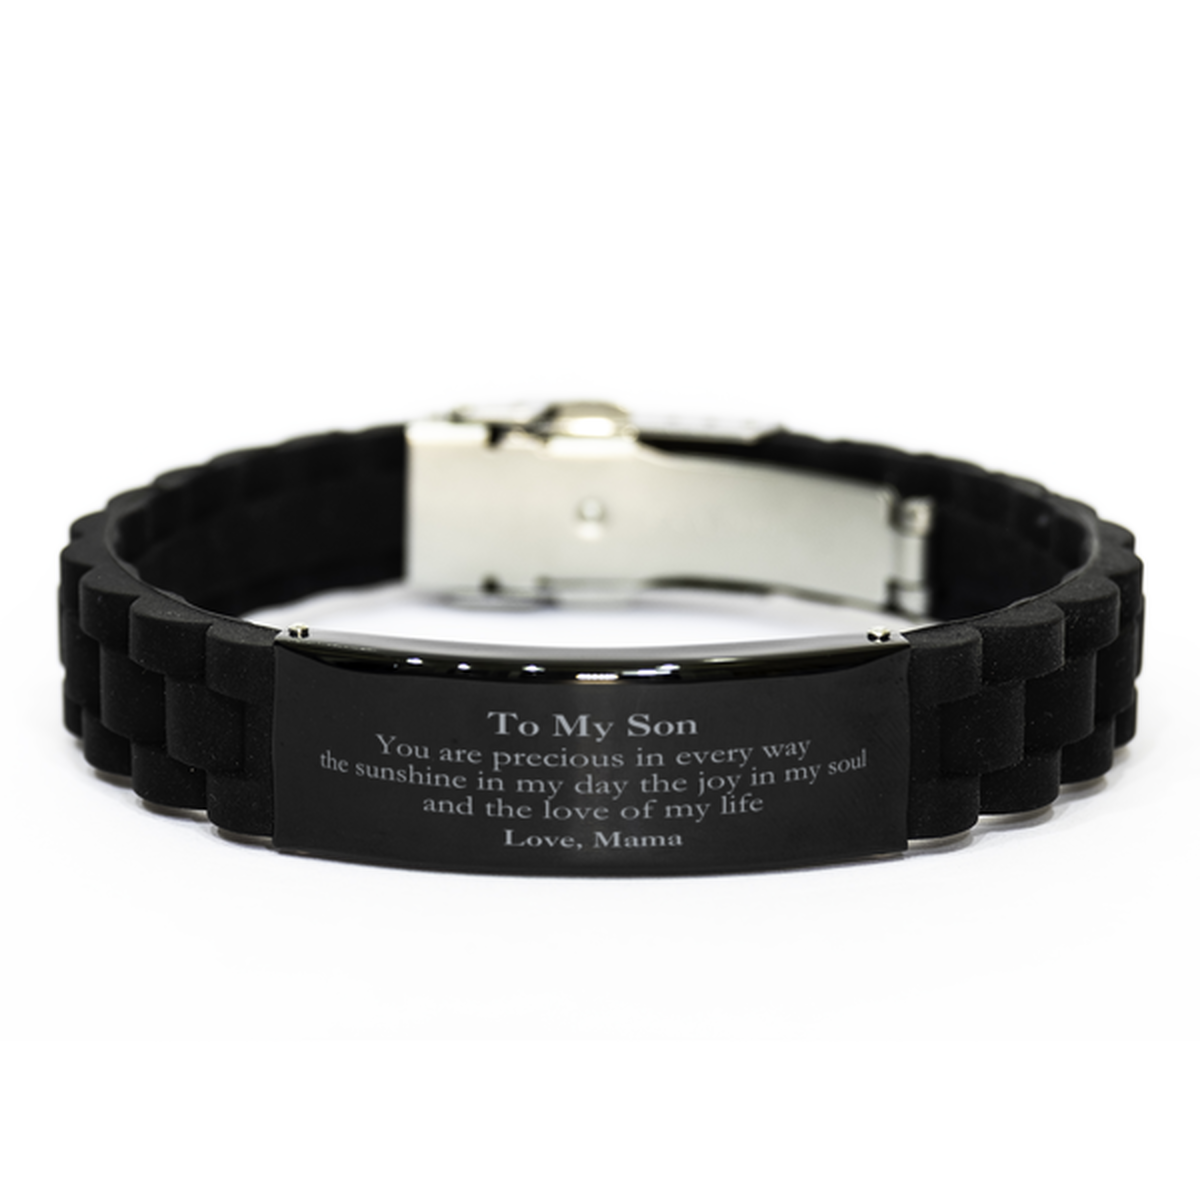 Graduation Gifts for Son Black Glidelock Clasp Bracelet Present from Mama, Christmas Son Birthday Gifts Son You are precious in every way the sunshine in my day. Love, Mama